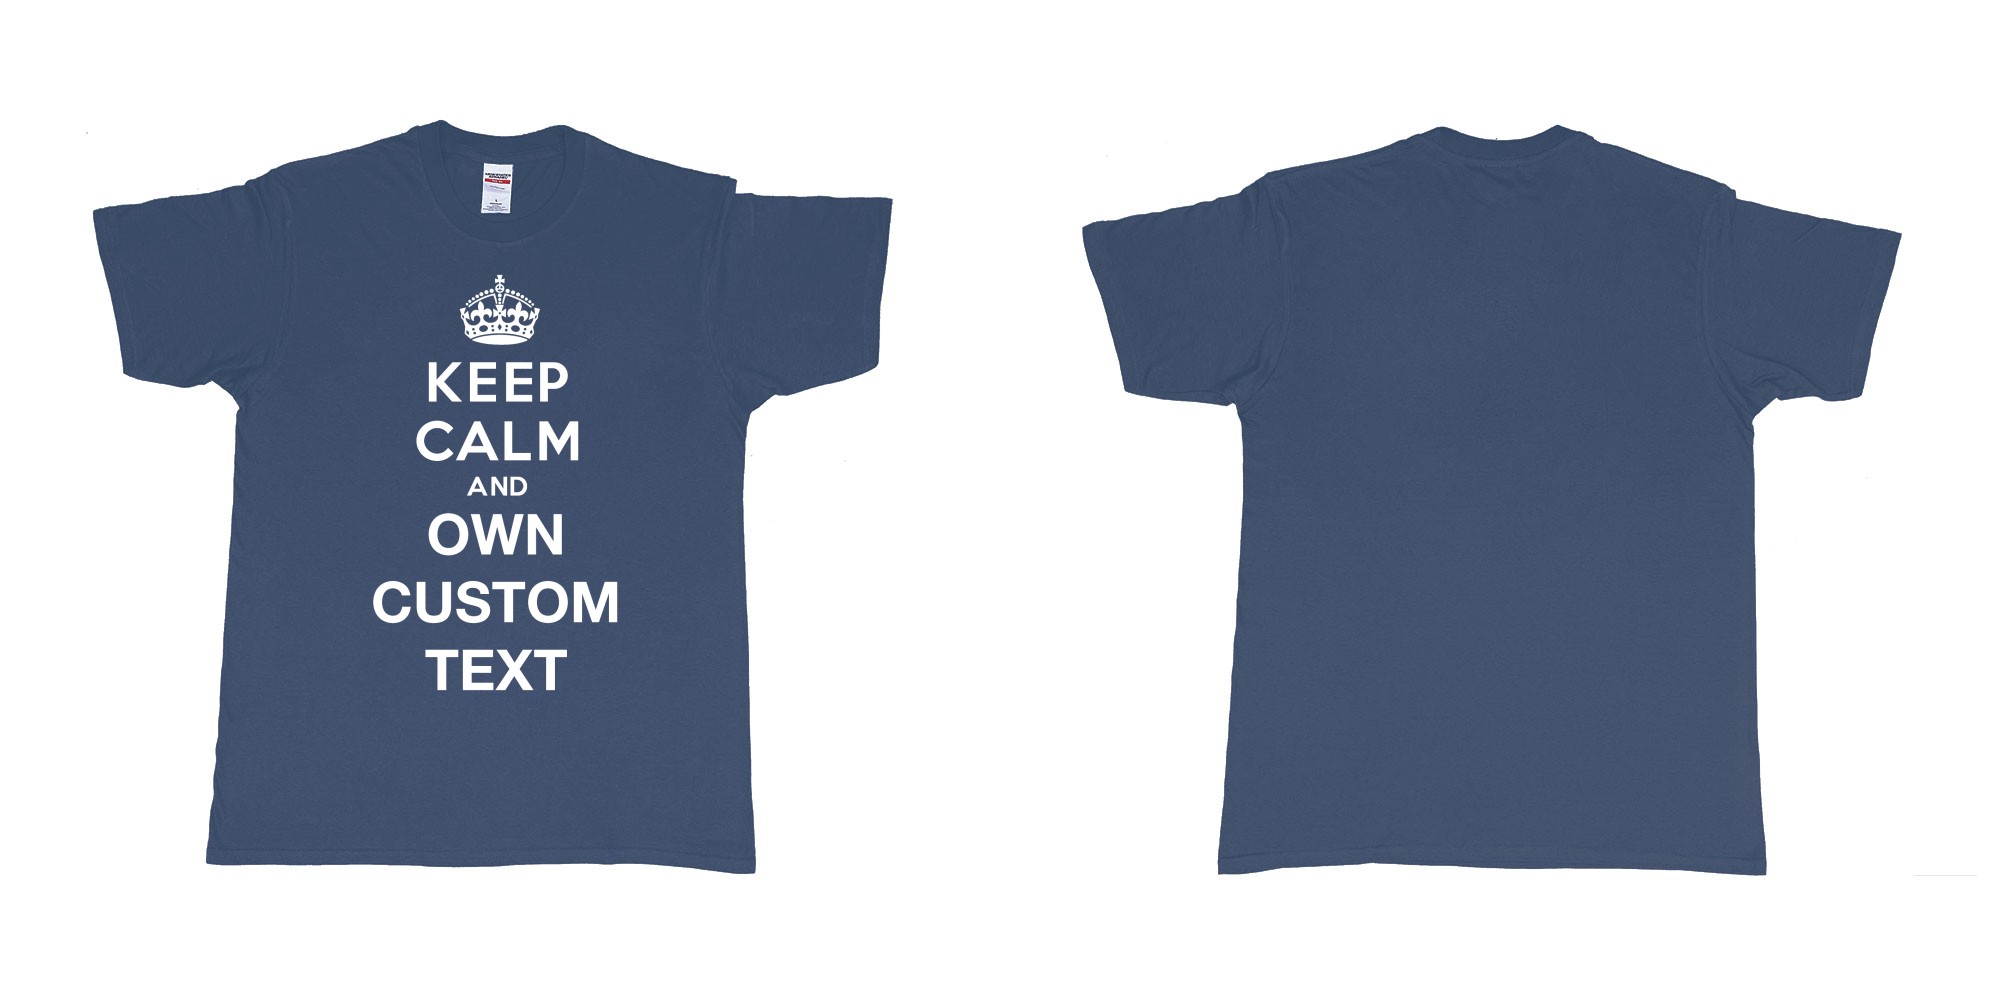 Custom tshirt design Keep Calm And in fabric color navy choice your own text made in Bali by The Pirate Way